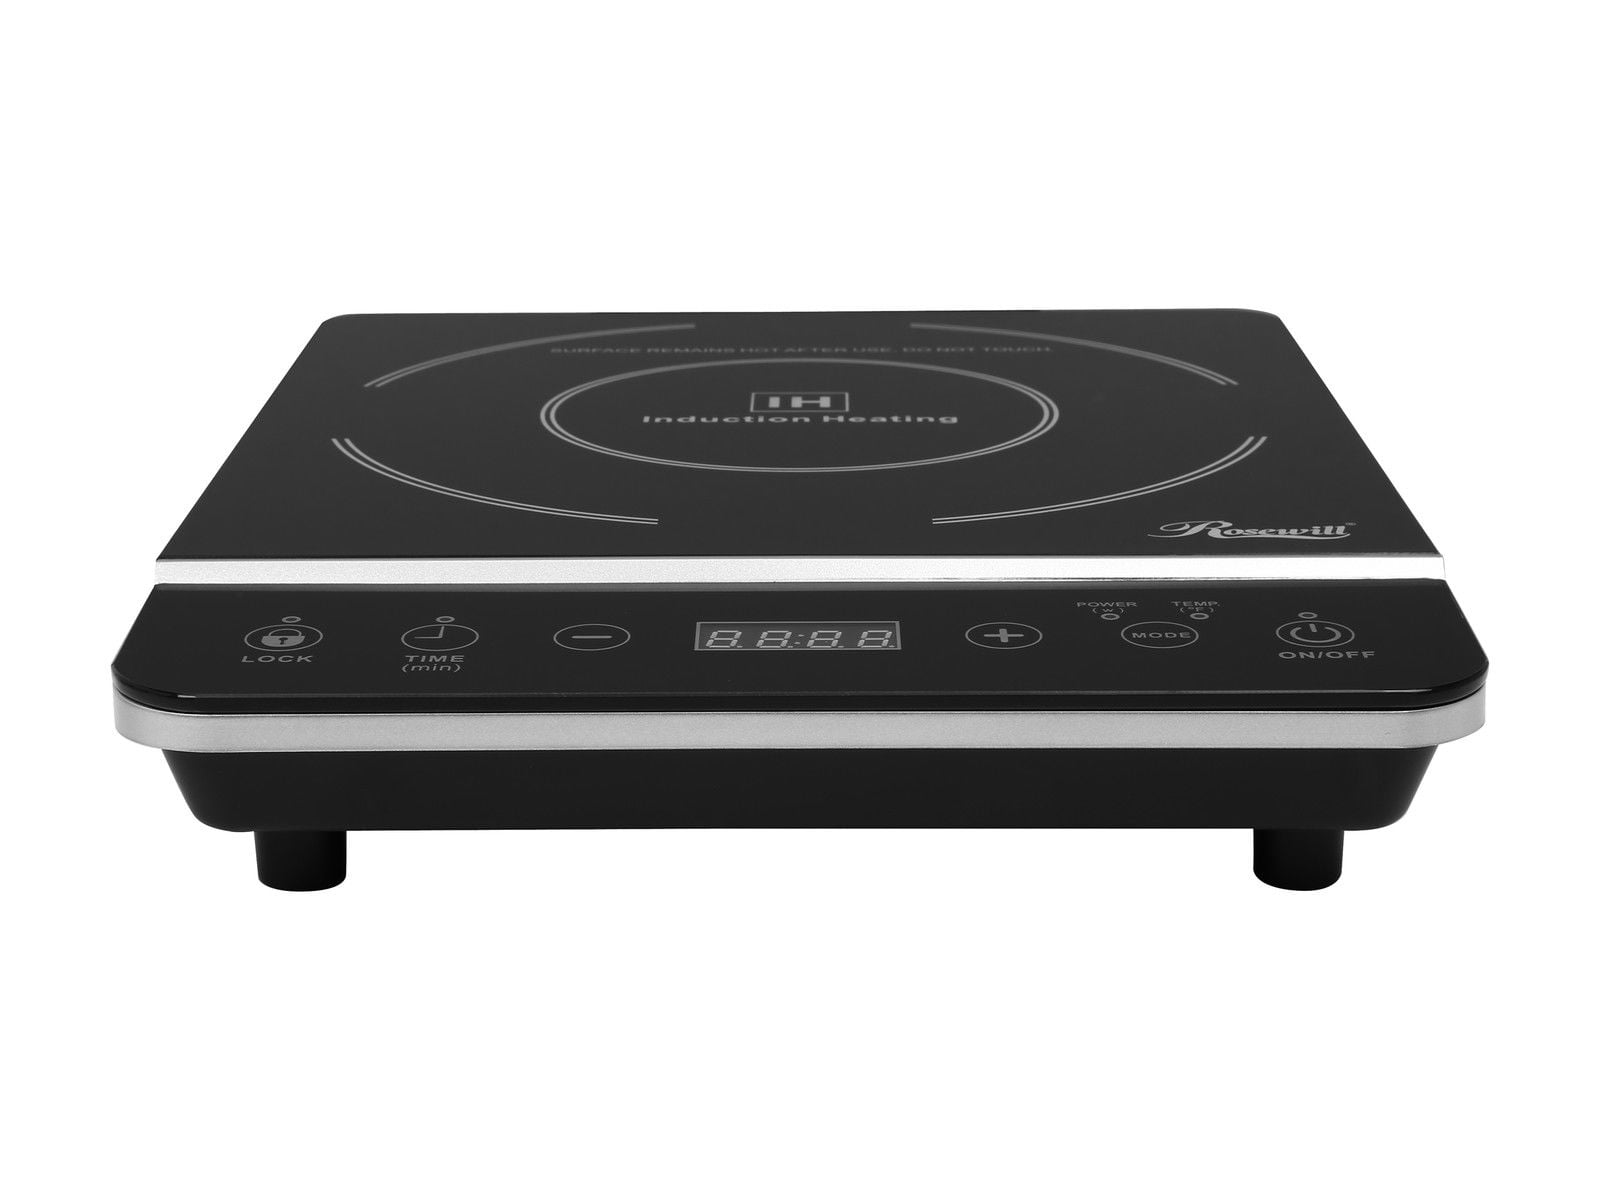 Details about   Electric Cooktop Burner 1800W Hot Plate Portable 2 Burners Kitchen Cooking Stove 